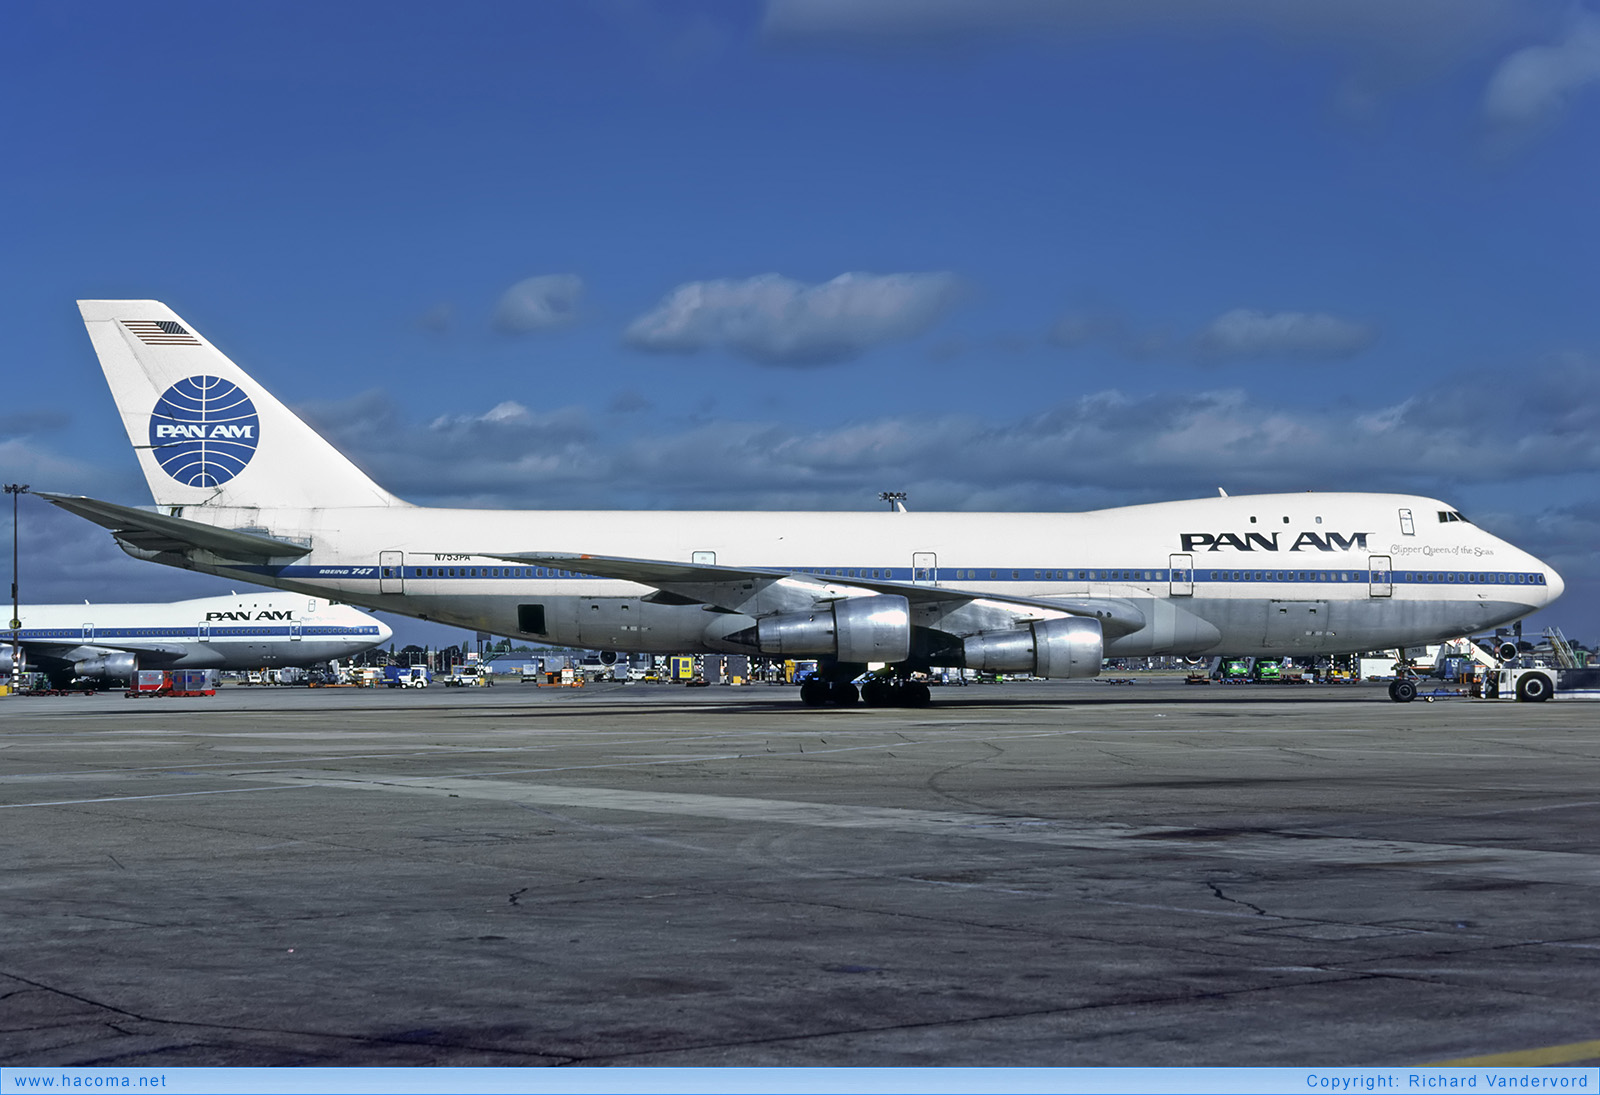 Photo of N753PA - Pan Am Clipper Westwind / Queen of the Skies - London Heathrow Airport - Oct 1985